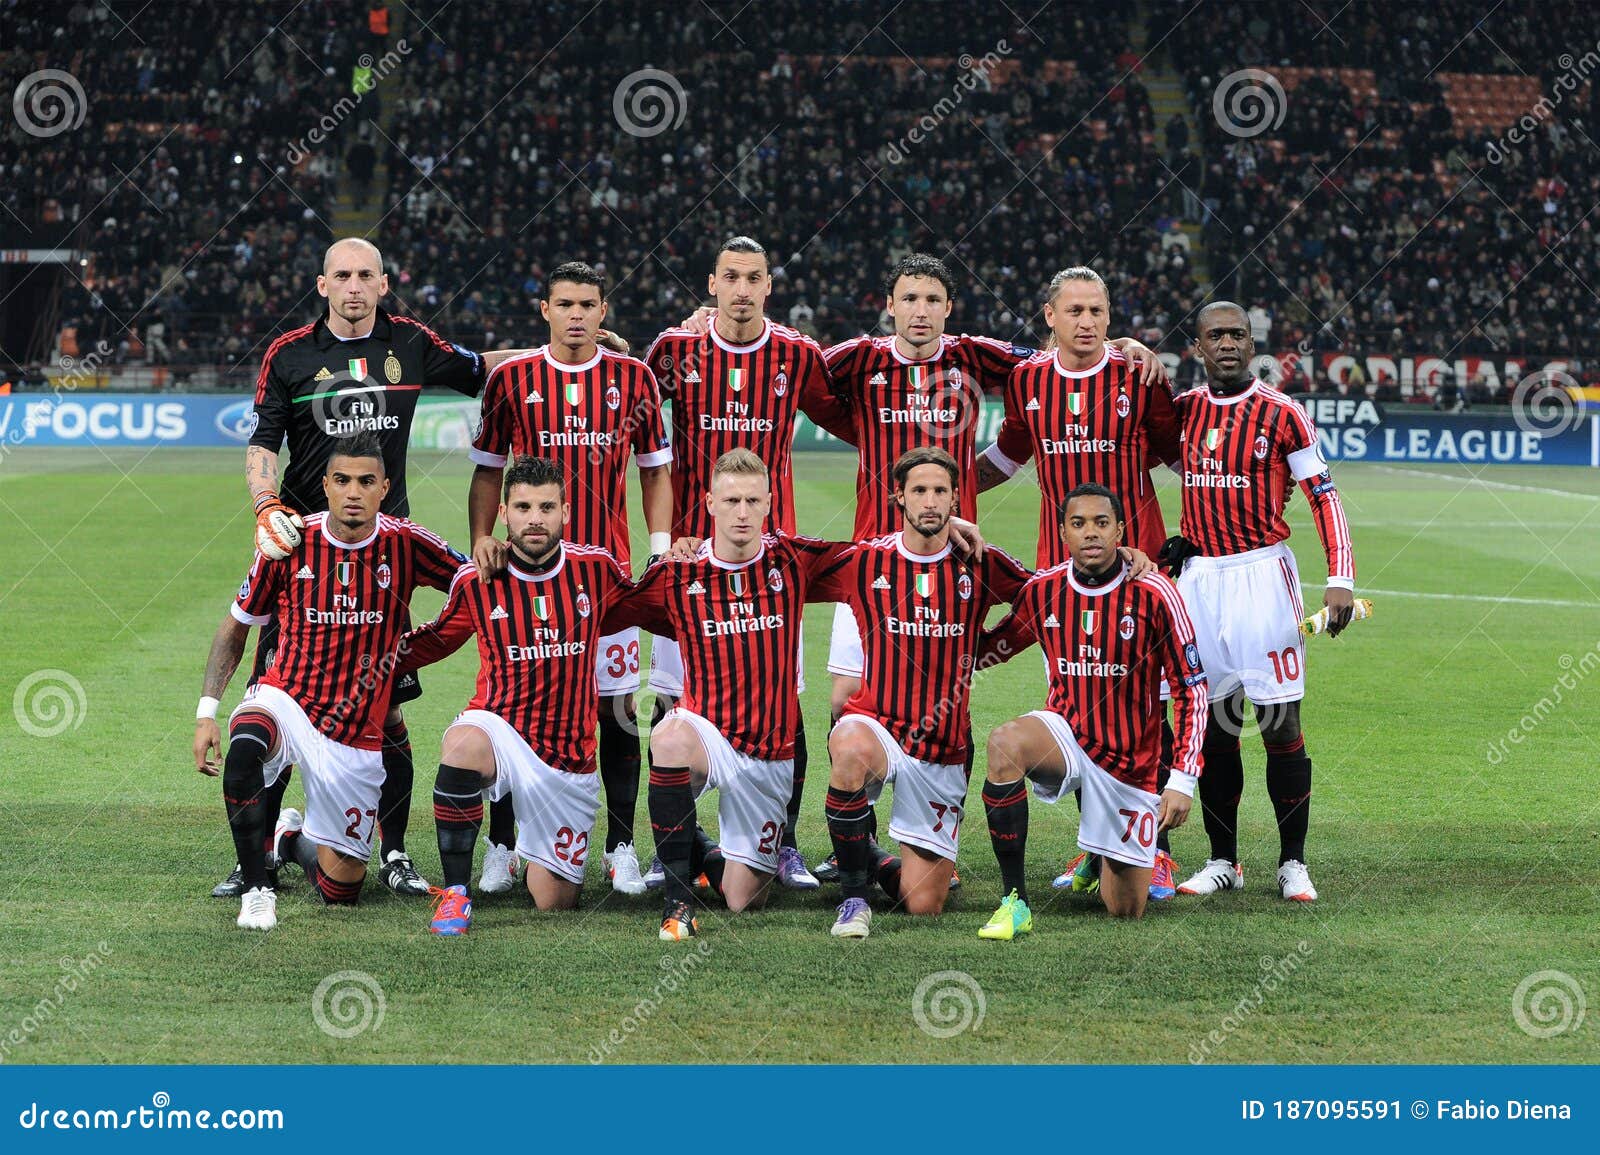 krog skjold tone The Milan Players before the Match Editorial Photo - Image of league,  20112012: 187095591